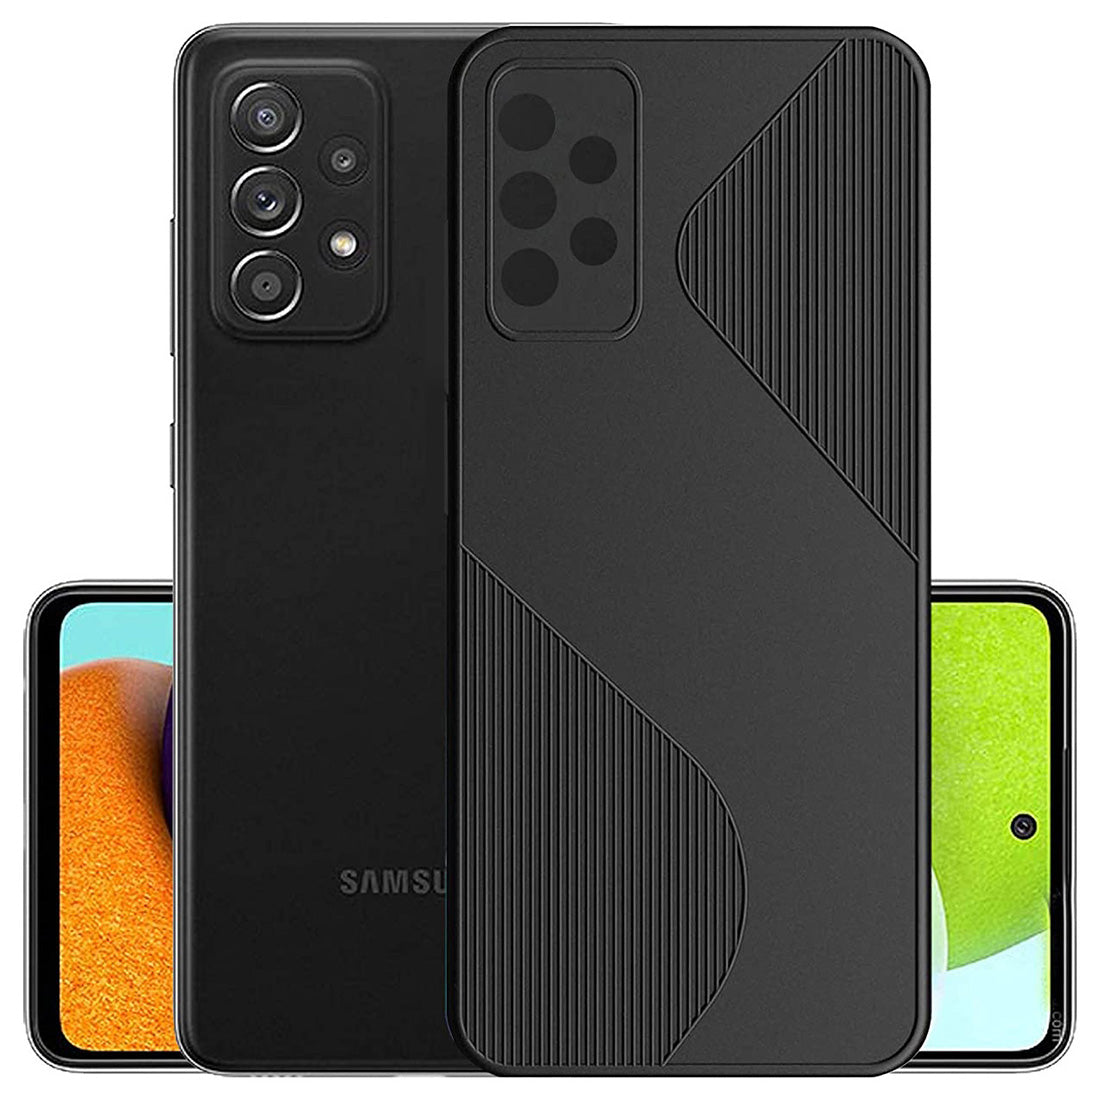 S-Style Matte TPU Back Cover for Samsung Galaxy A52 4G